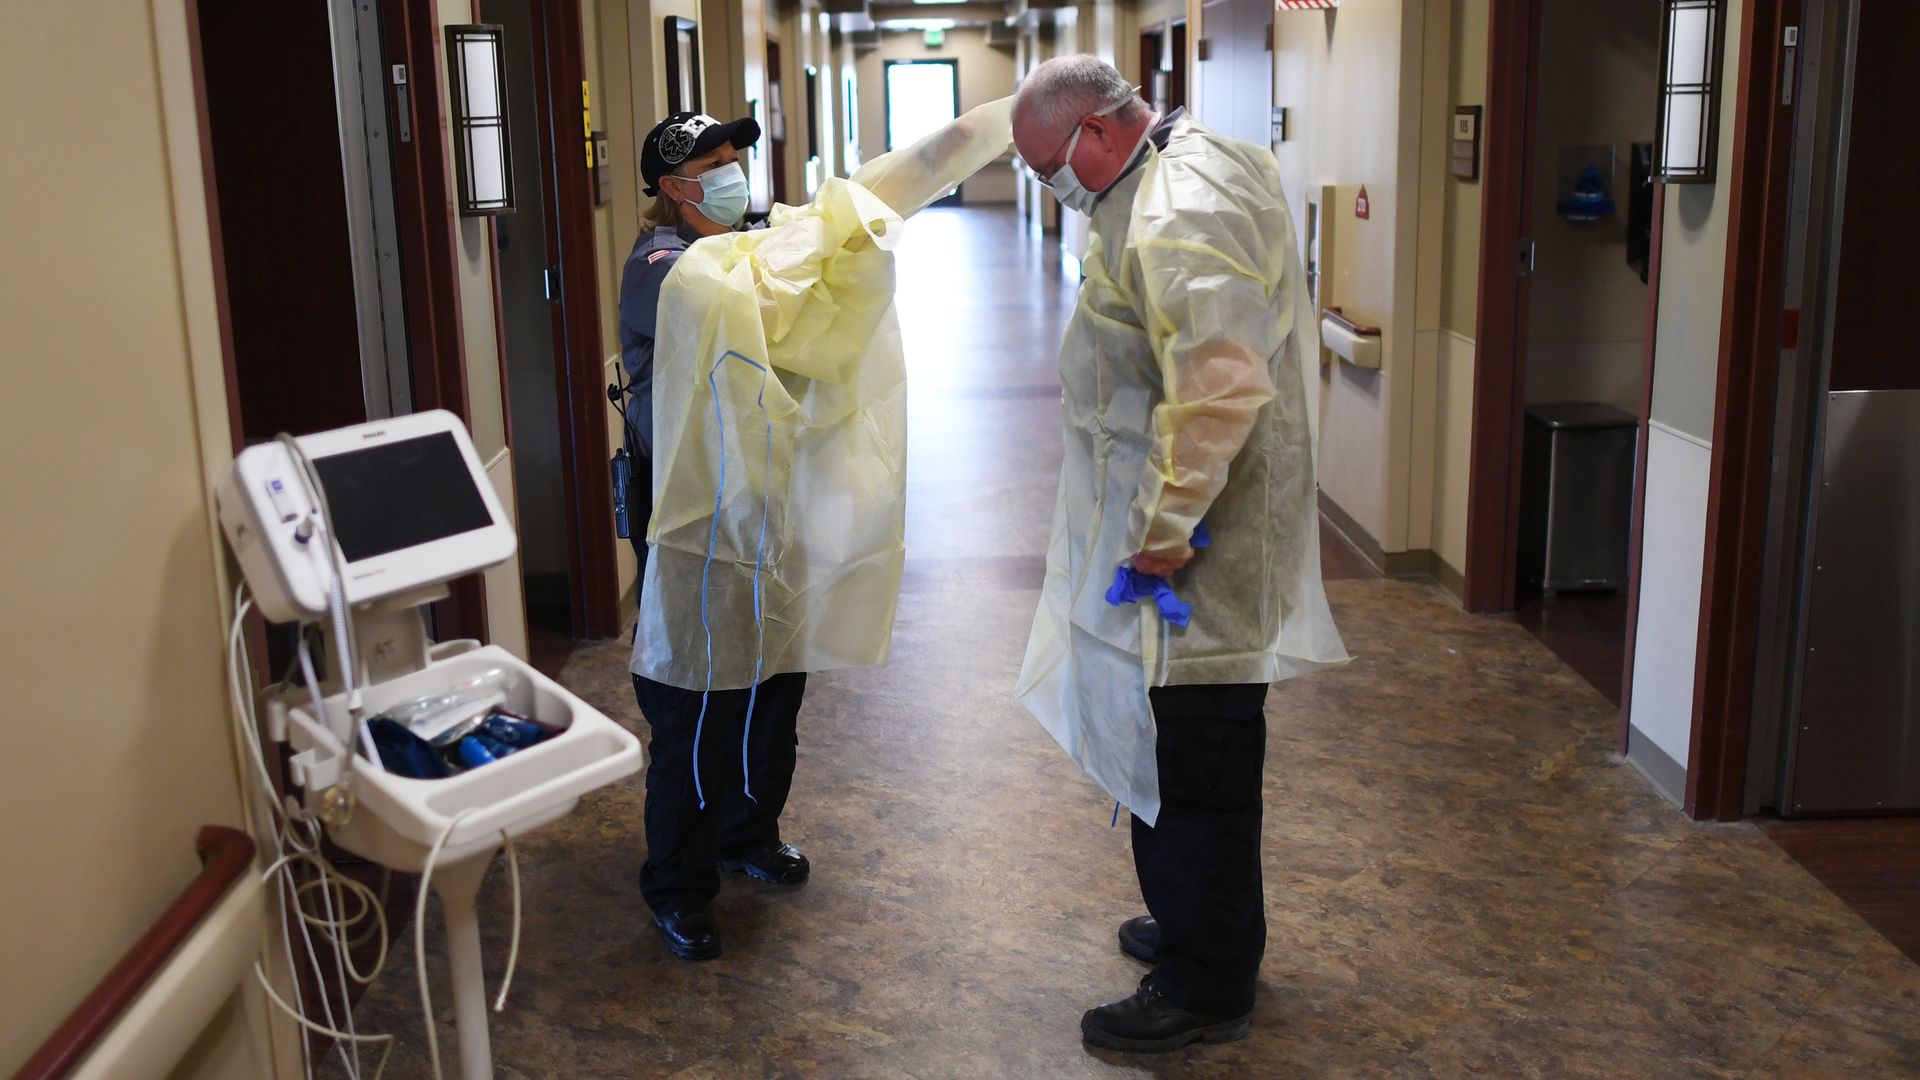 Two EMTs stand in a hospital hallway and put on yellow protective equipment outside a patient rom.